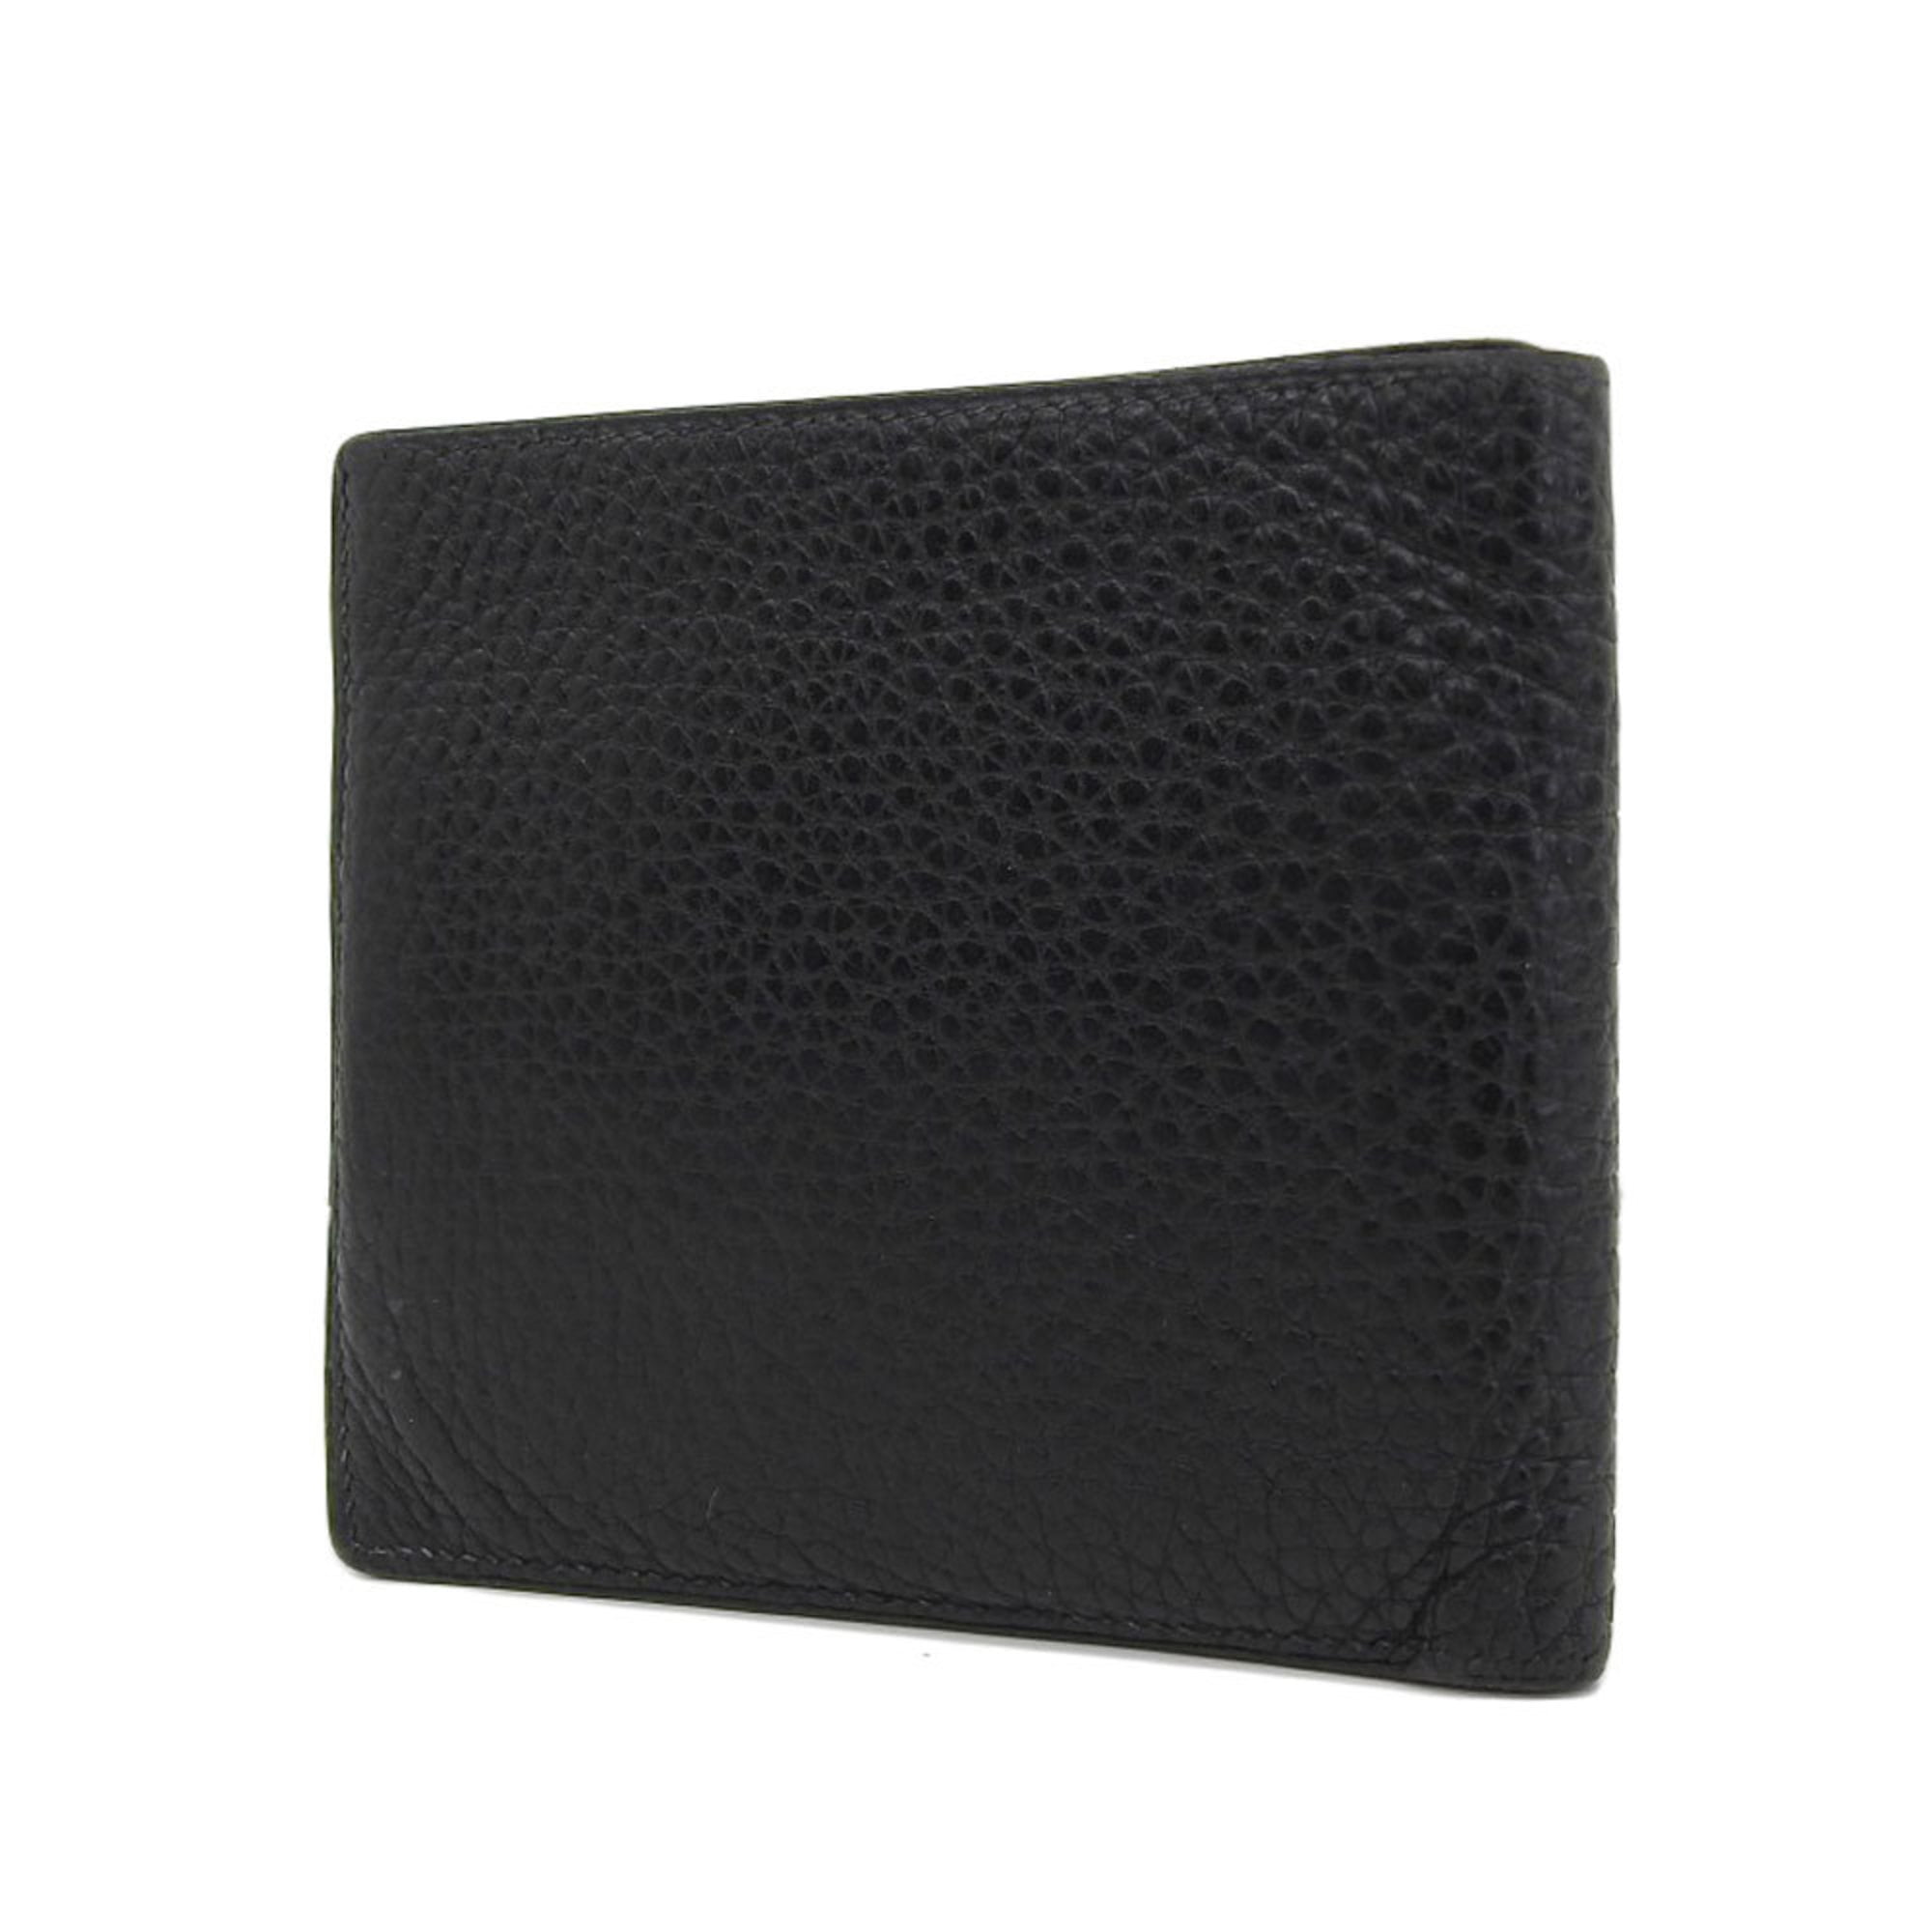 Hermès - Authenticated Béarn Wallet - Leather Black Plain for Women, Never Worn